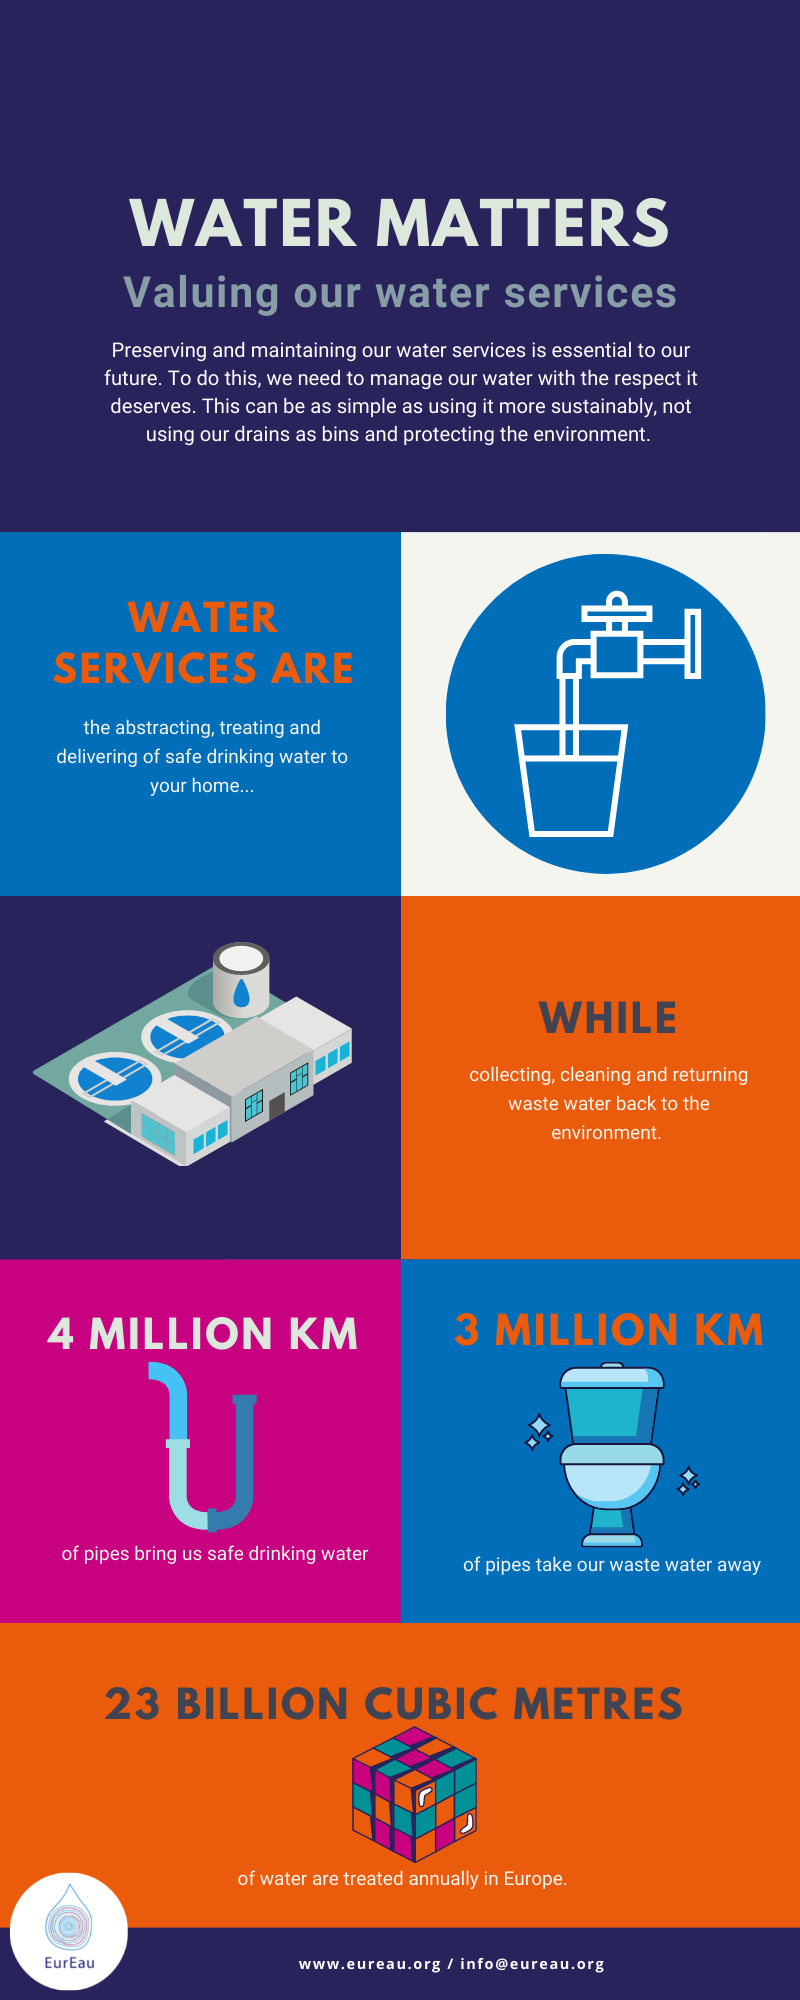 Valuing our Water Services - infographic